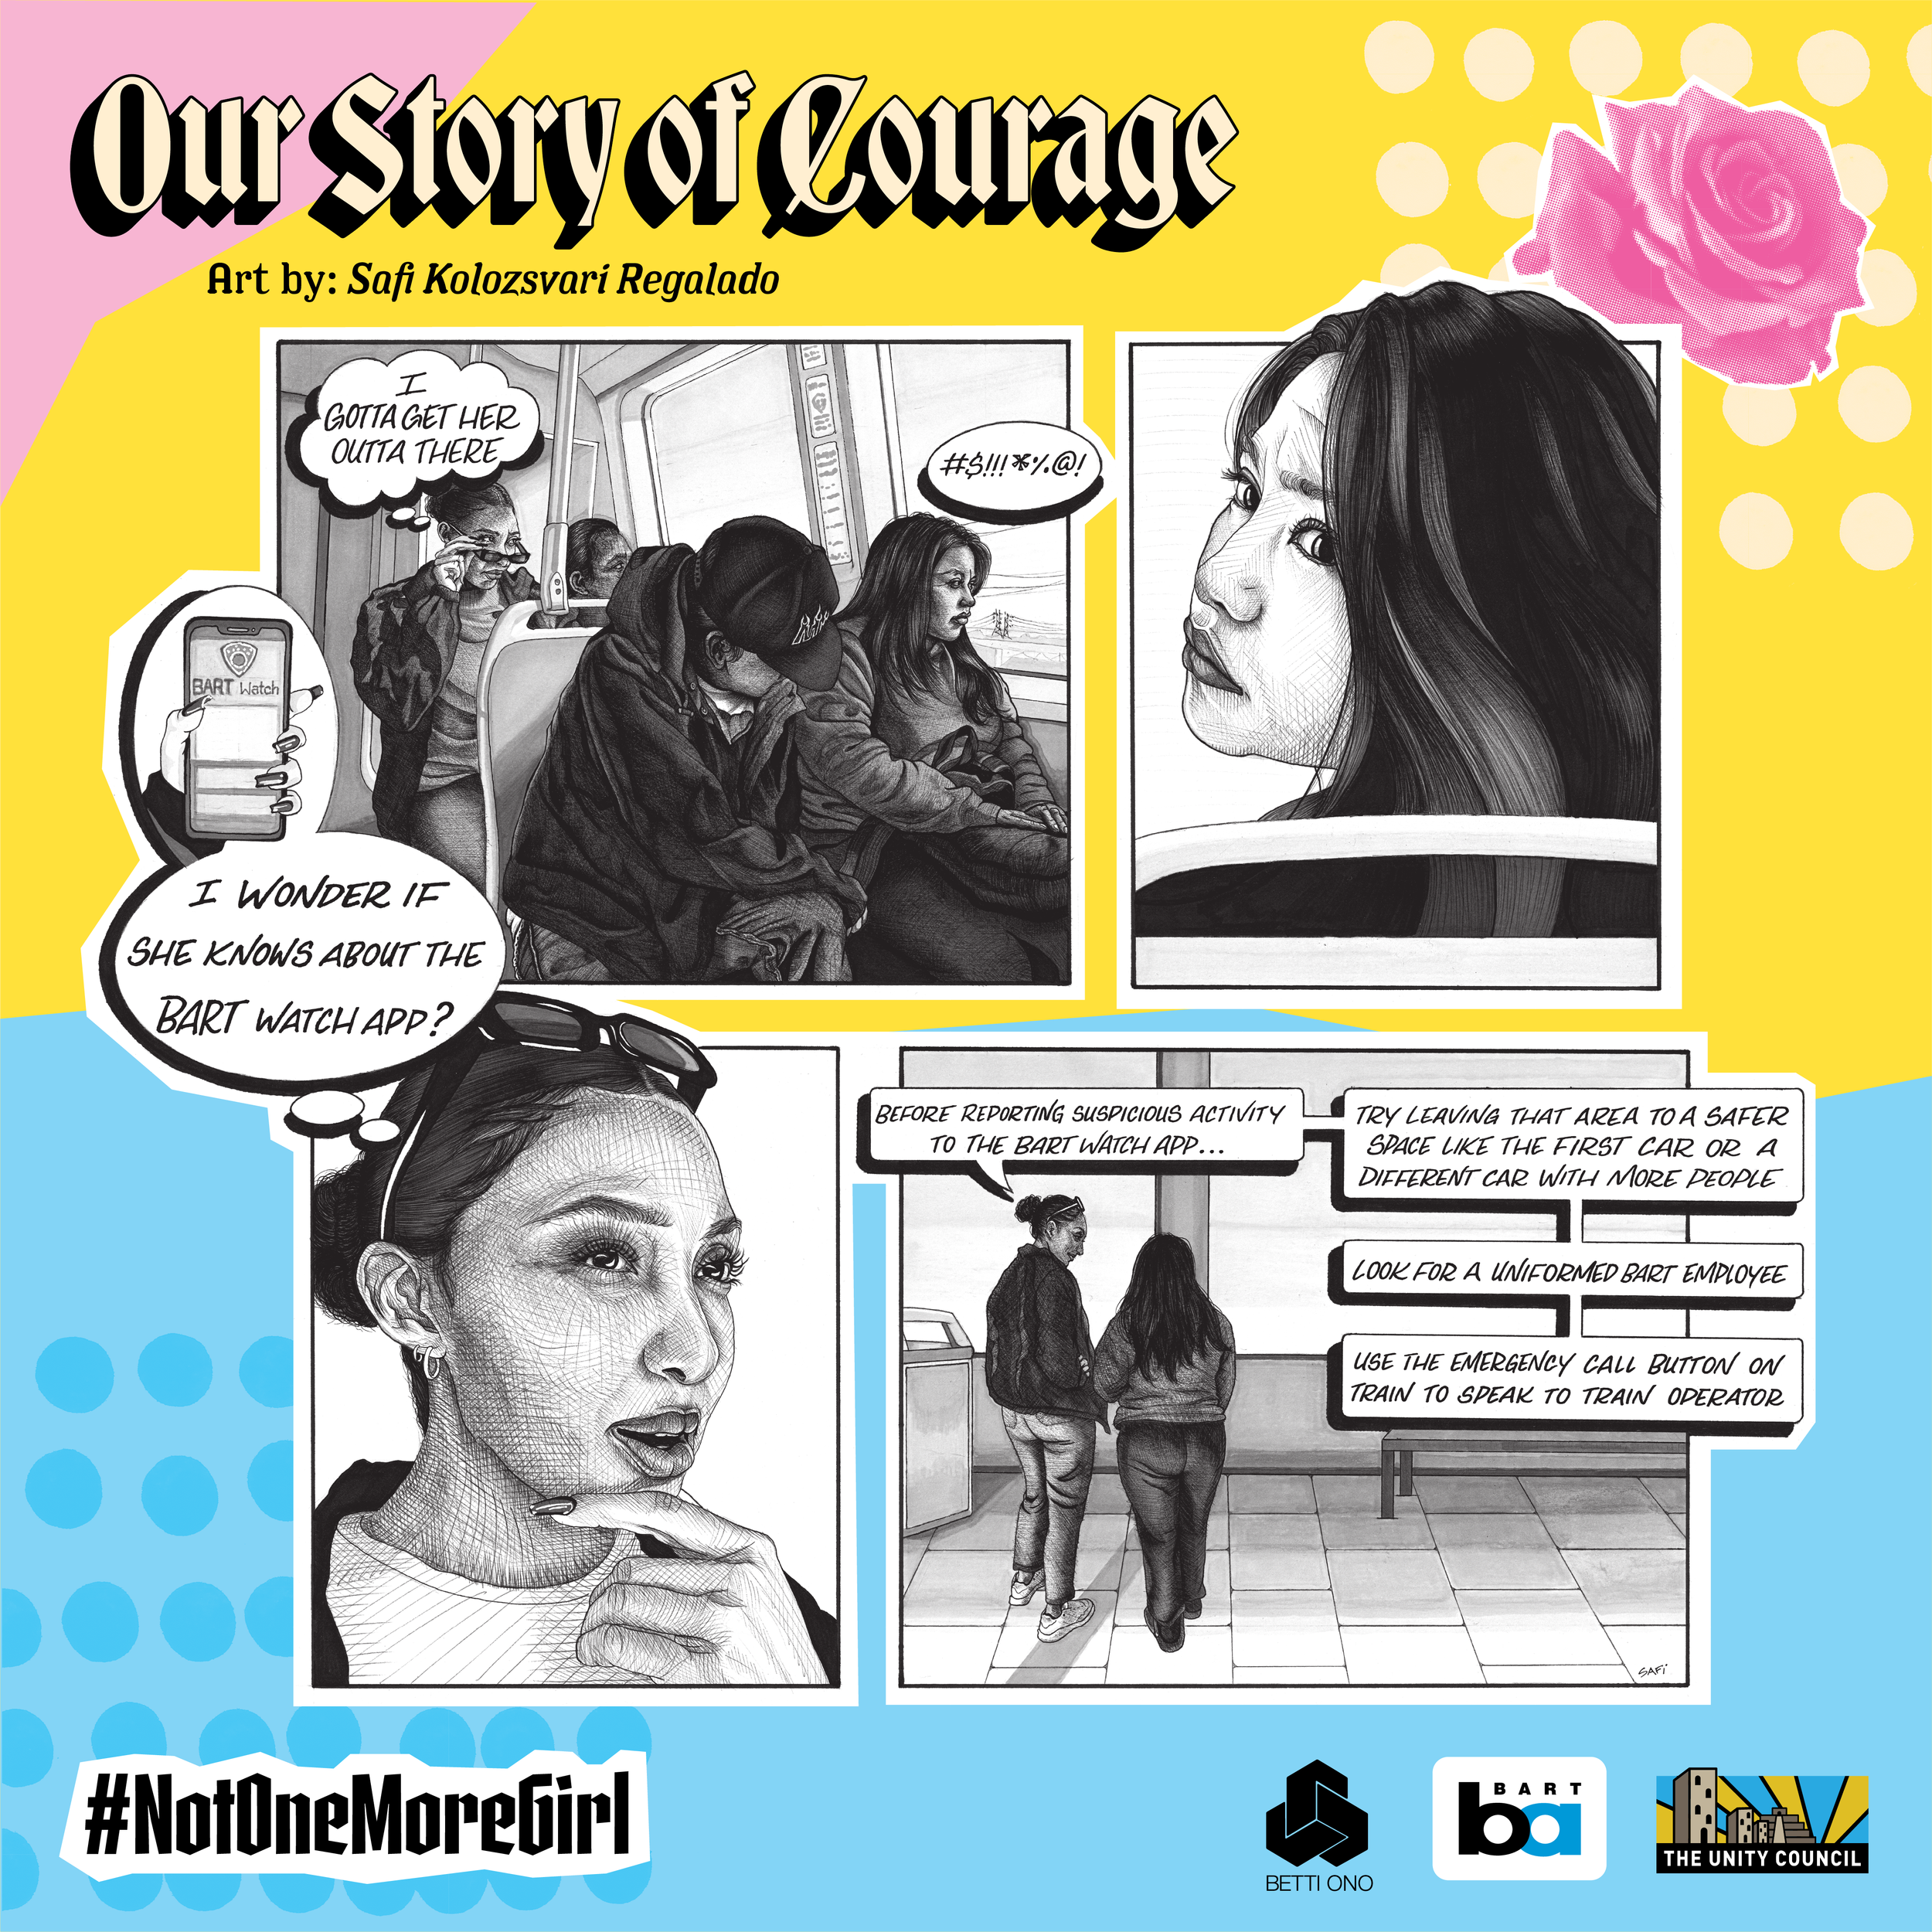  Comic for Our Story of Courage campaign. Art by Safi Kolozsvari Regalado. Comic illustrates two young women on BART. One supports the other who is being harassed on the train. The comic text bubbles reads: I gotta get her outta there. I wonder if sh